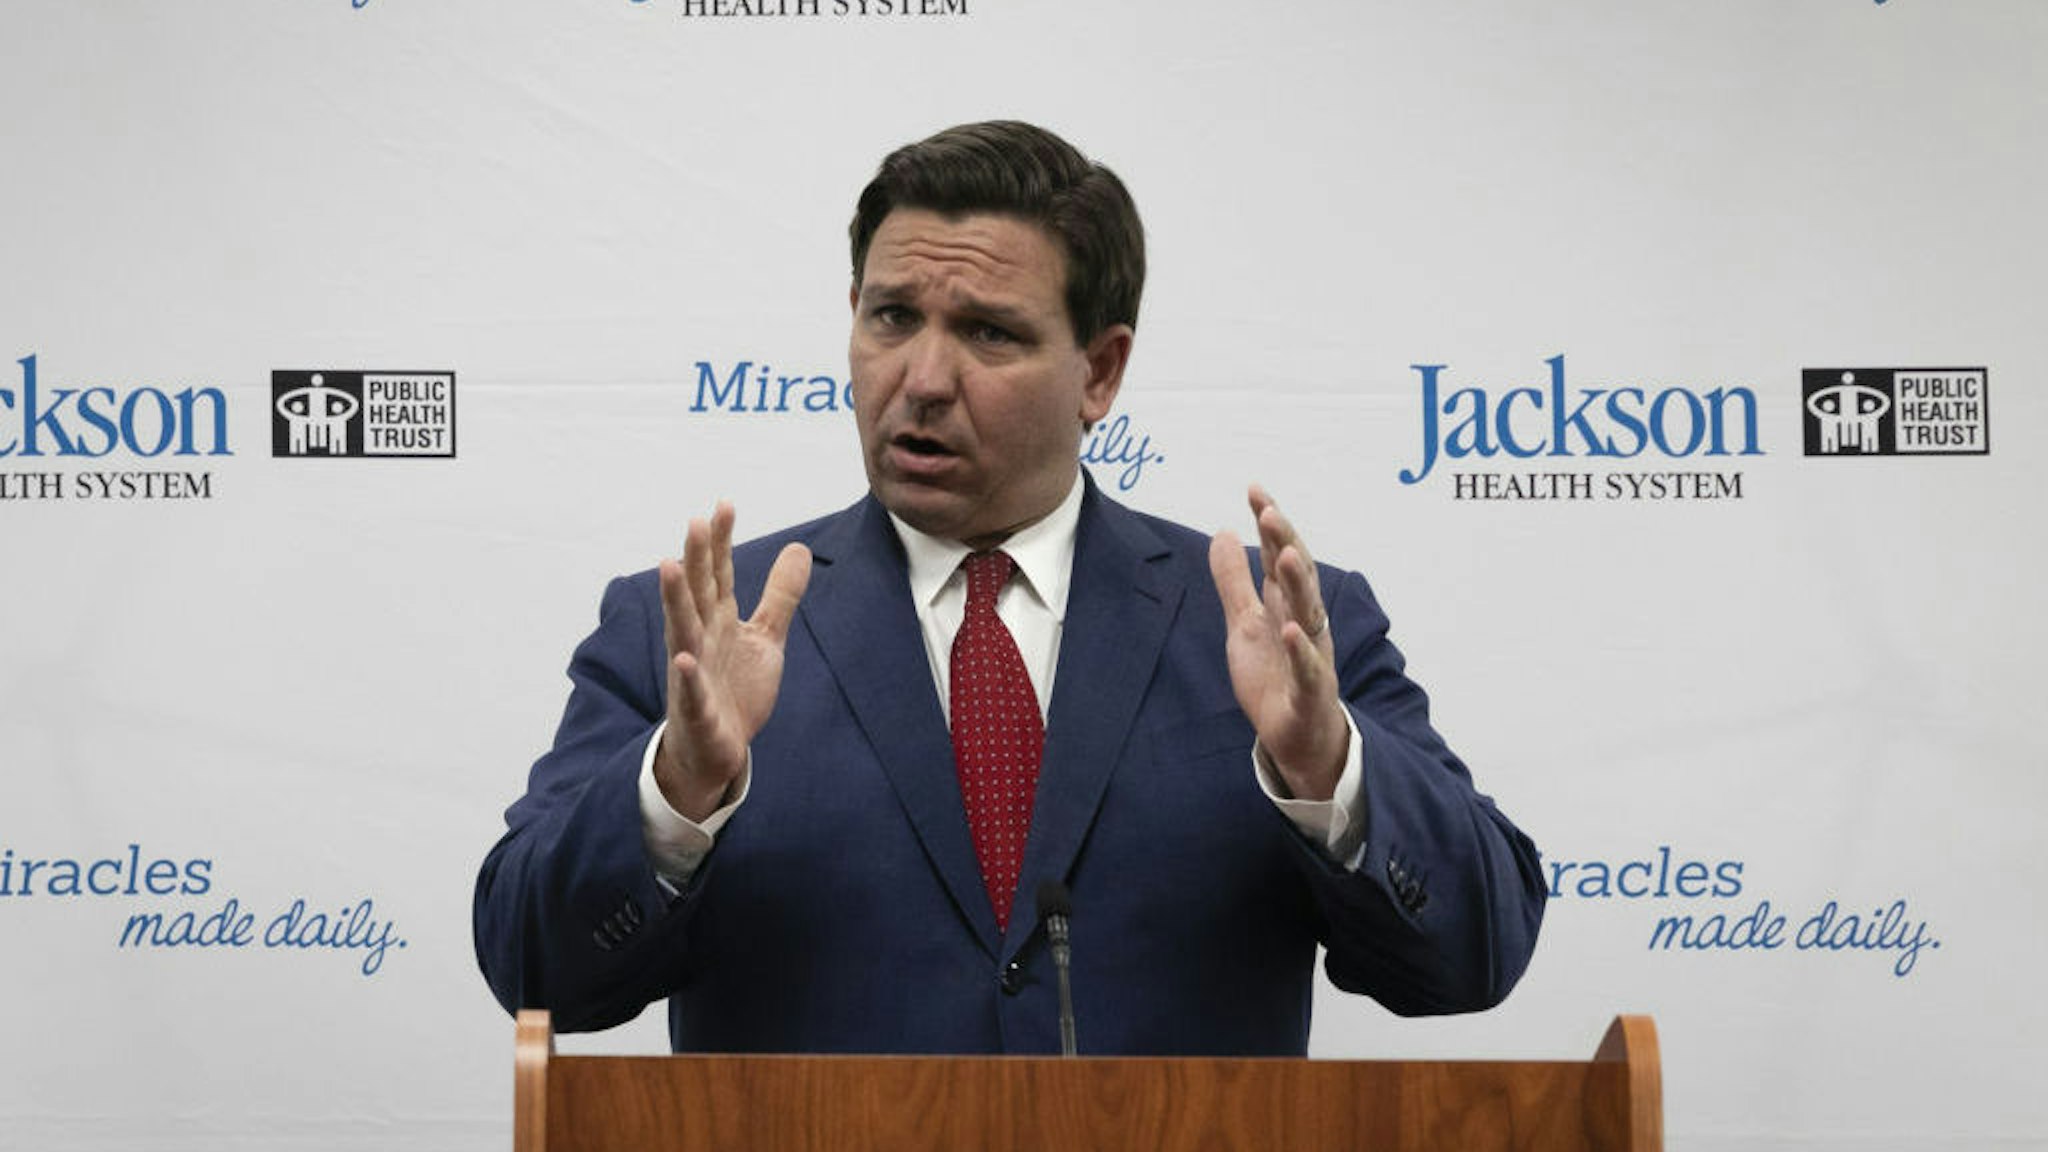 Ron DeSantis, governor of Florida, speaks during a press conference at Jackson Memorial Hospital in Miami, Florida, U.S., on Monday, July 13, 2020. Florida reported 282,435 Covid-19 cases on Monday, up 4.7% from a day earlier, compared with an average increase of 4.4% in the previous seven days. Photographer: Eva Marie Uzcategui/Bloomberg